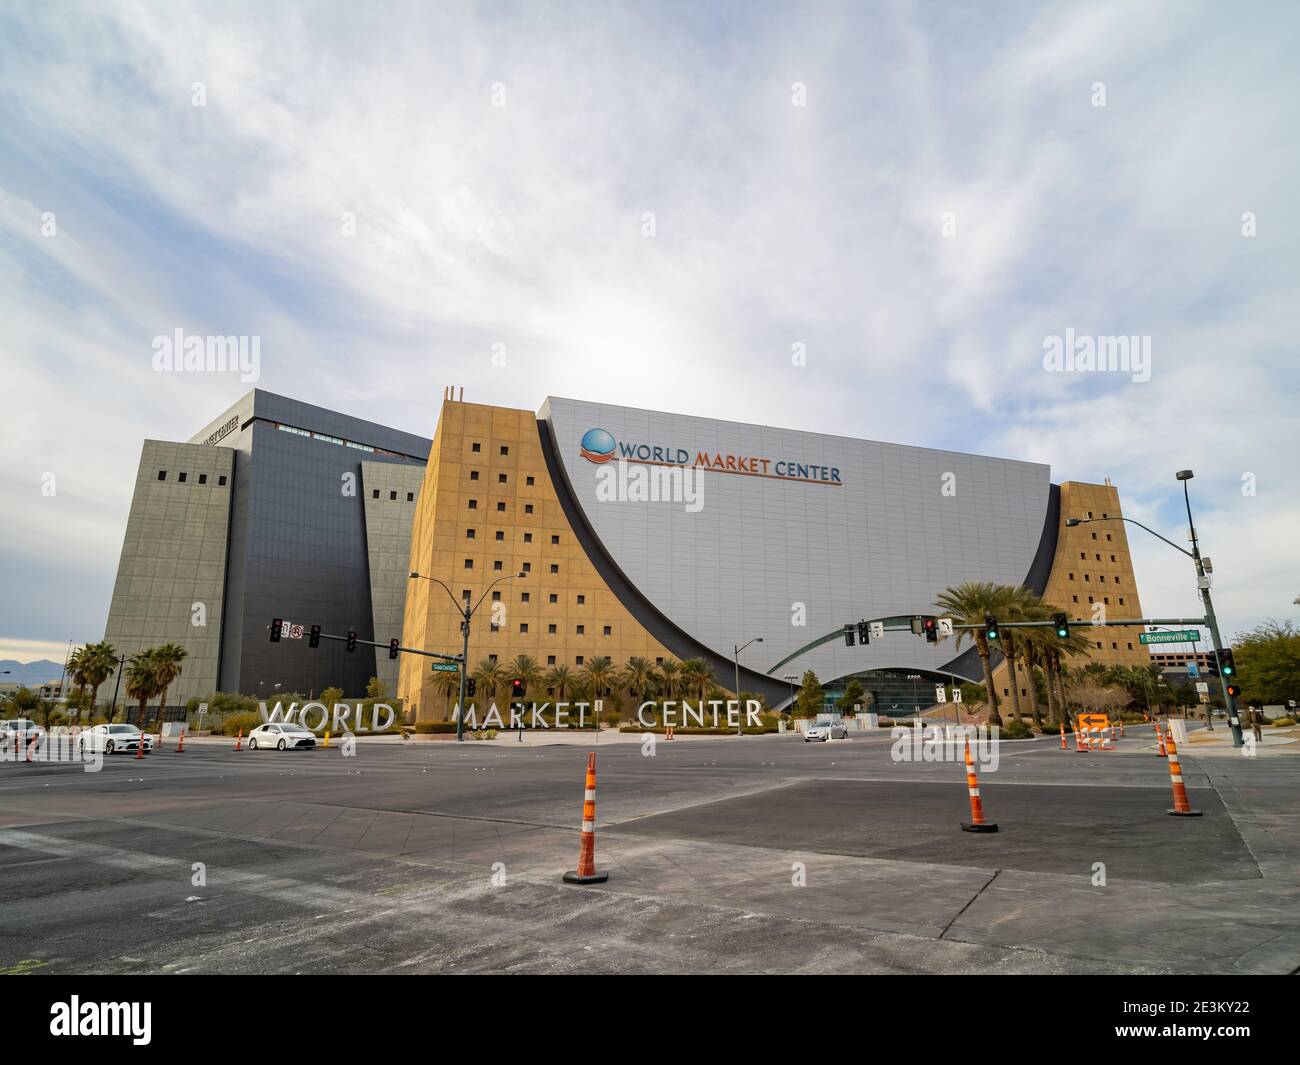 Las Vegas Jan 8 21 Afternoon View Of The World Market Center Stock Photo Alamy